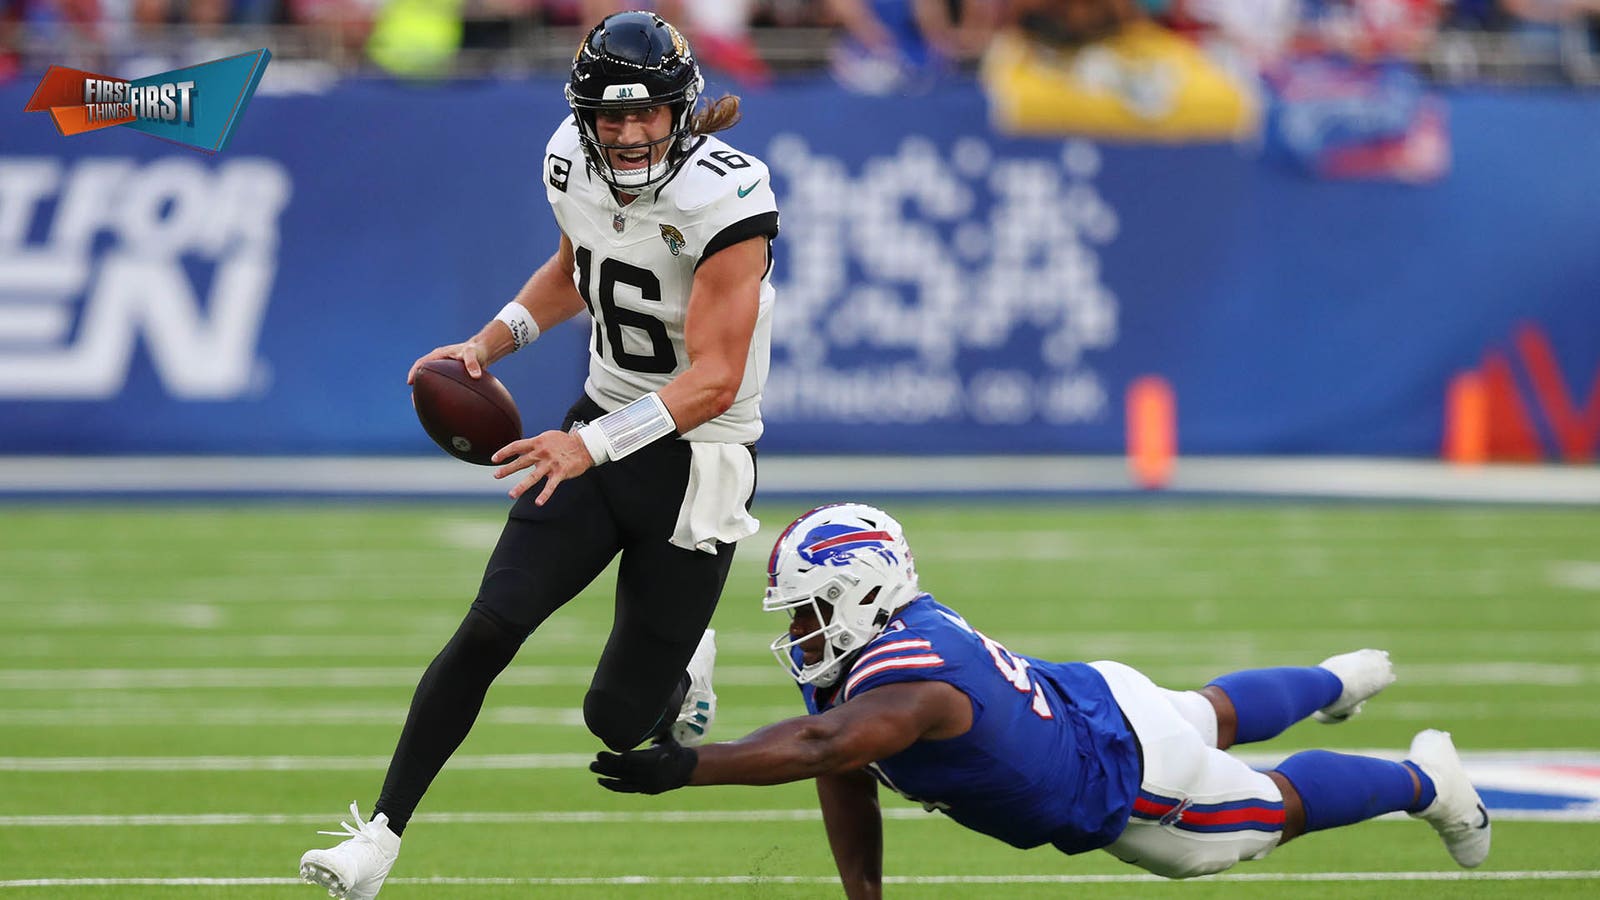 Jags improve to 3-2 after win over Bills